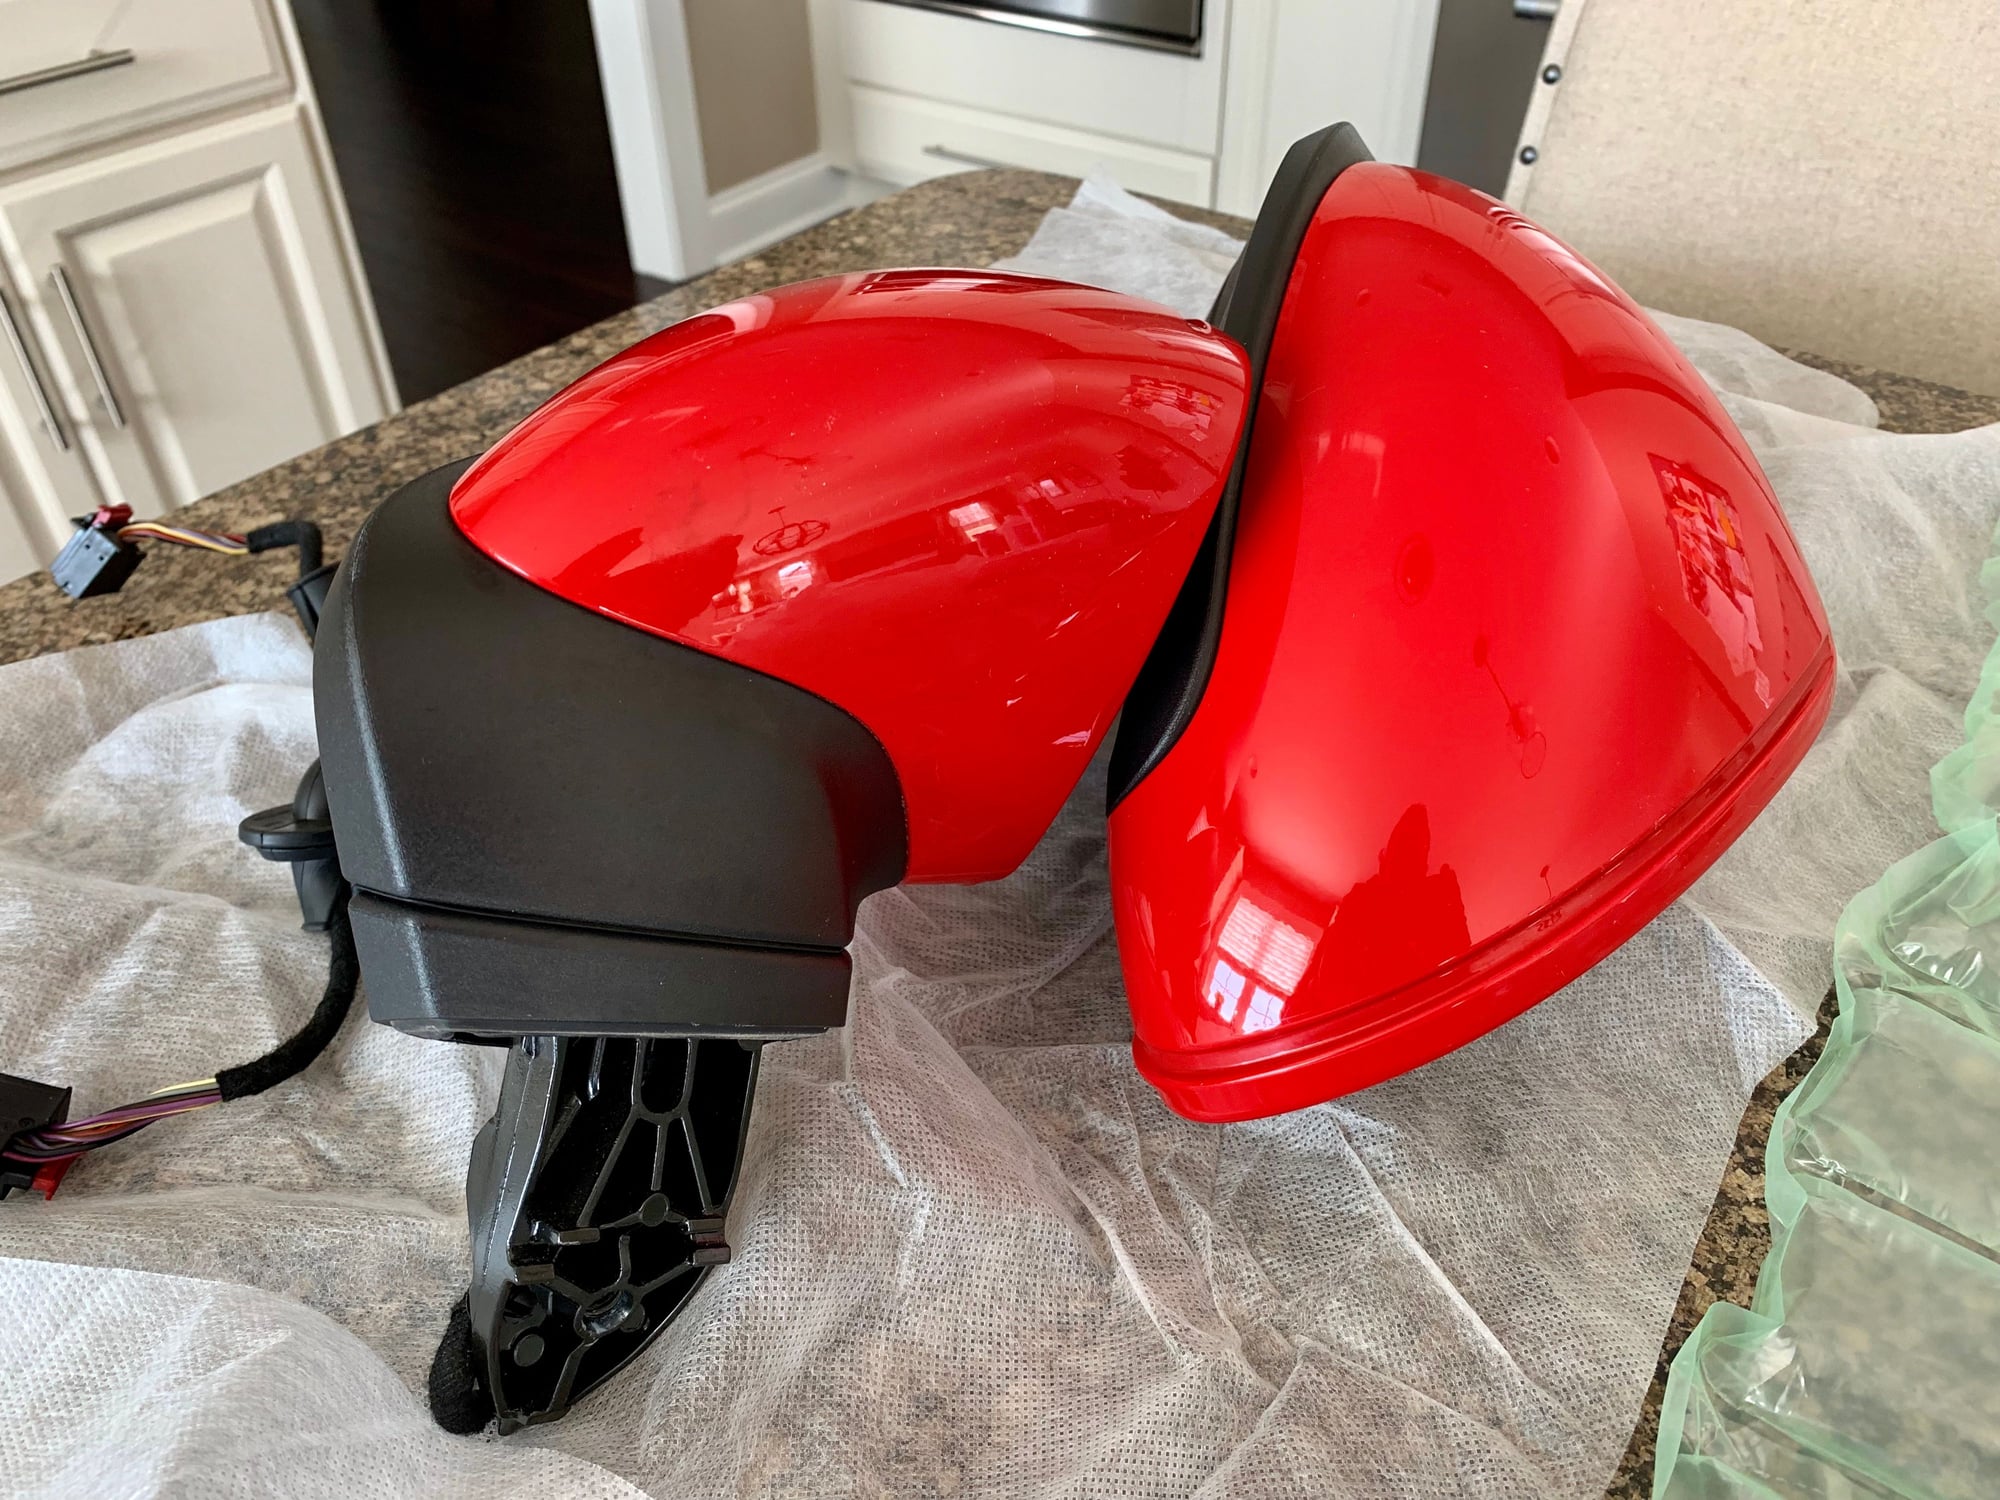 Exterior Body Parts - FS: 991/981 Guards Red mirrors. Power, heated, auto dim, memory. - Used - 2012 to 2016 Porsche 911 - 2013 to 2016 Porsche Boxster - 2013 to 2016 Porsche Cayman - Lansdale, PA 19446, United States